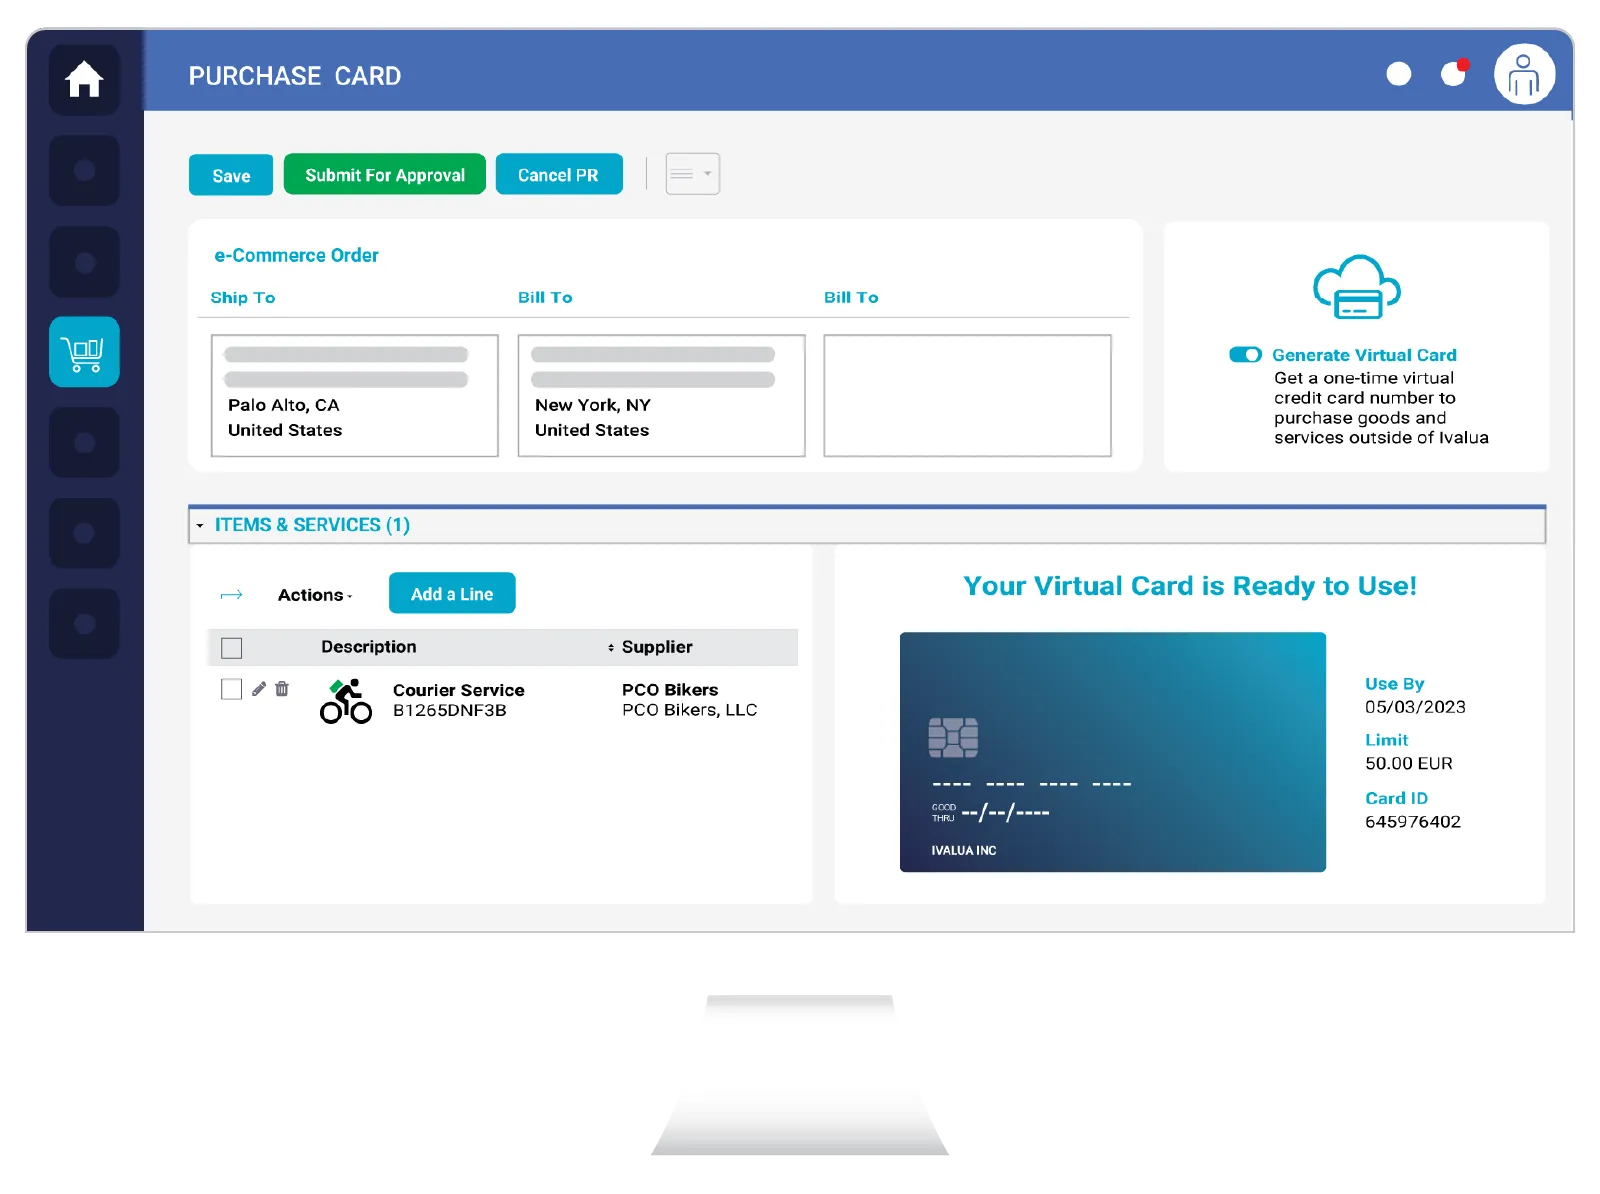 Screenshot - Payment Cards - Purchase Card